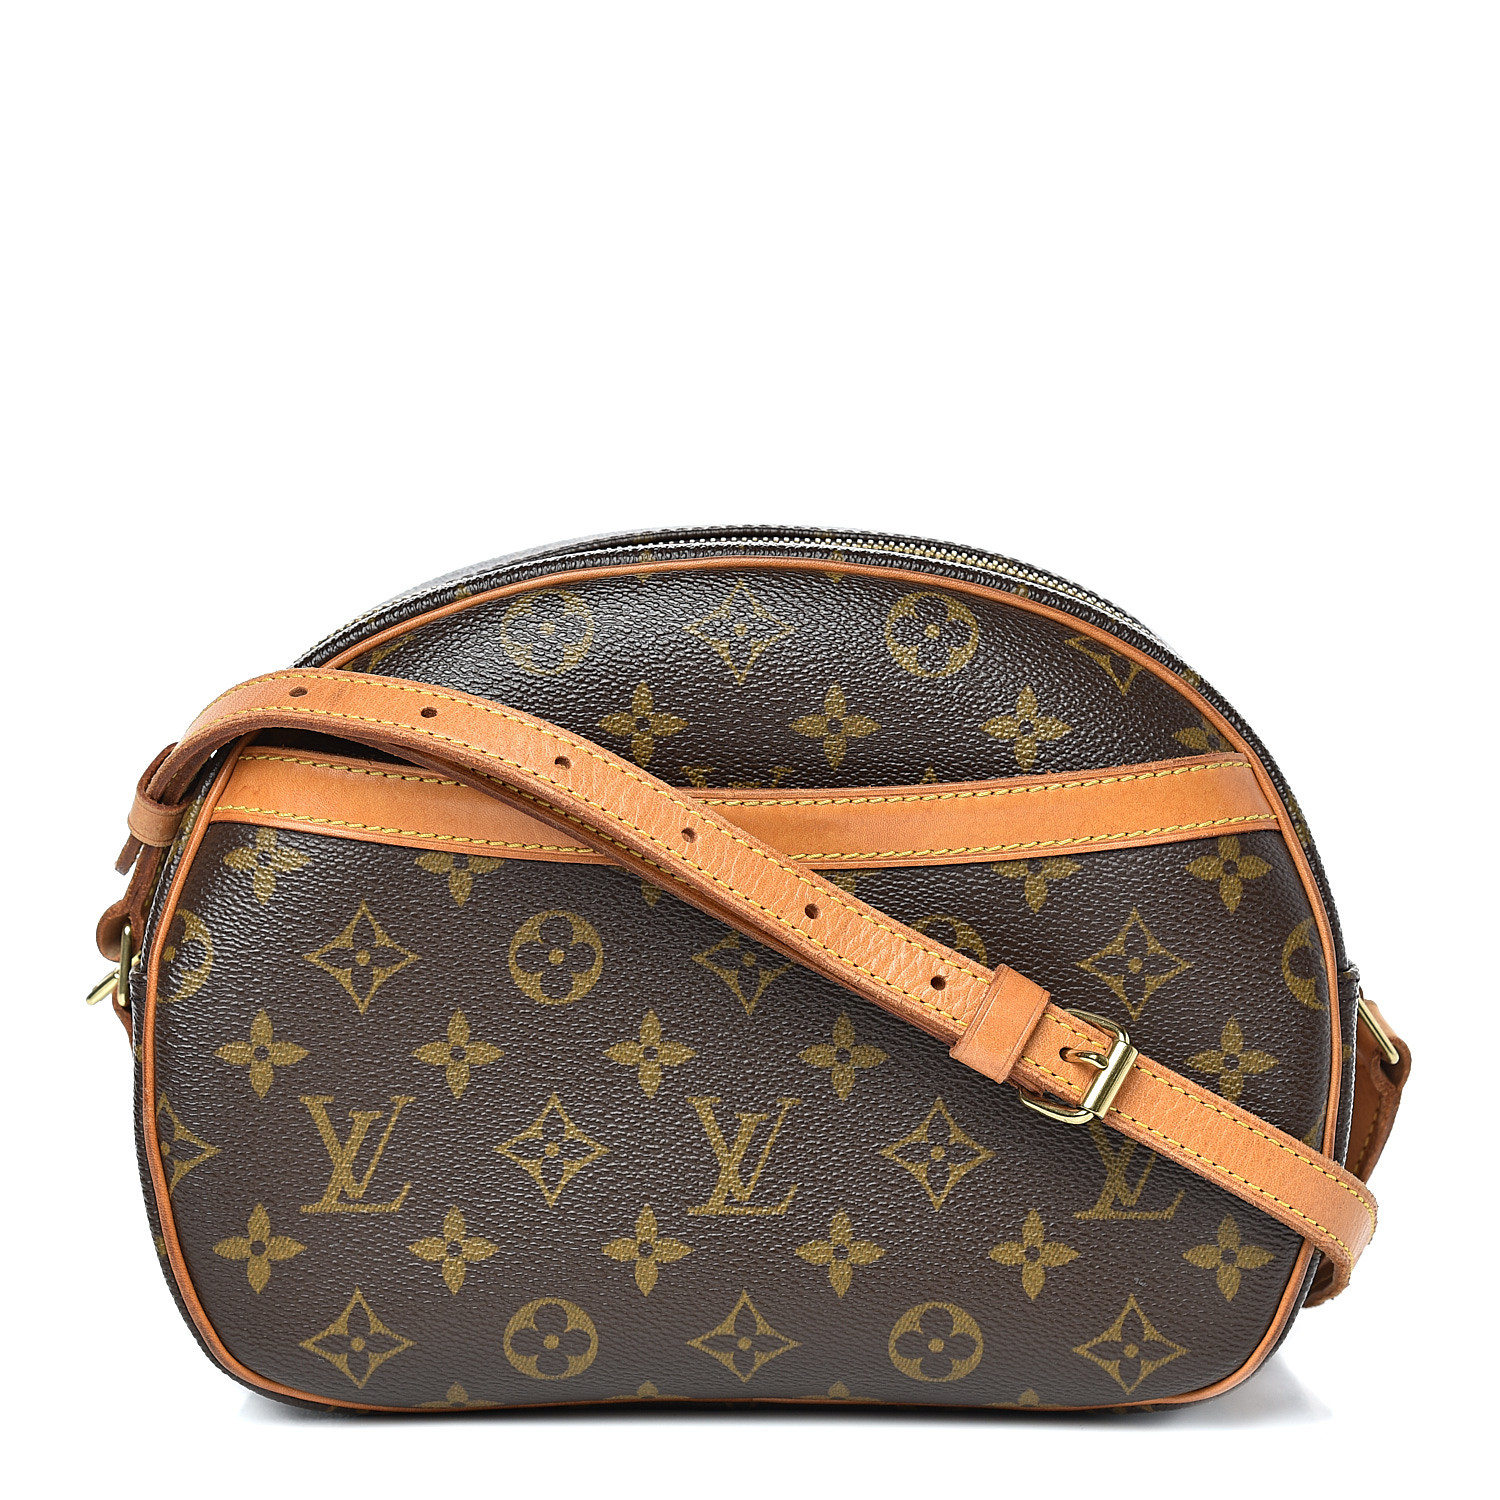 What Goes Around Comes Around Lv Monogram Blois Bag in Brown